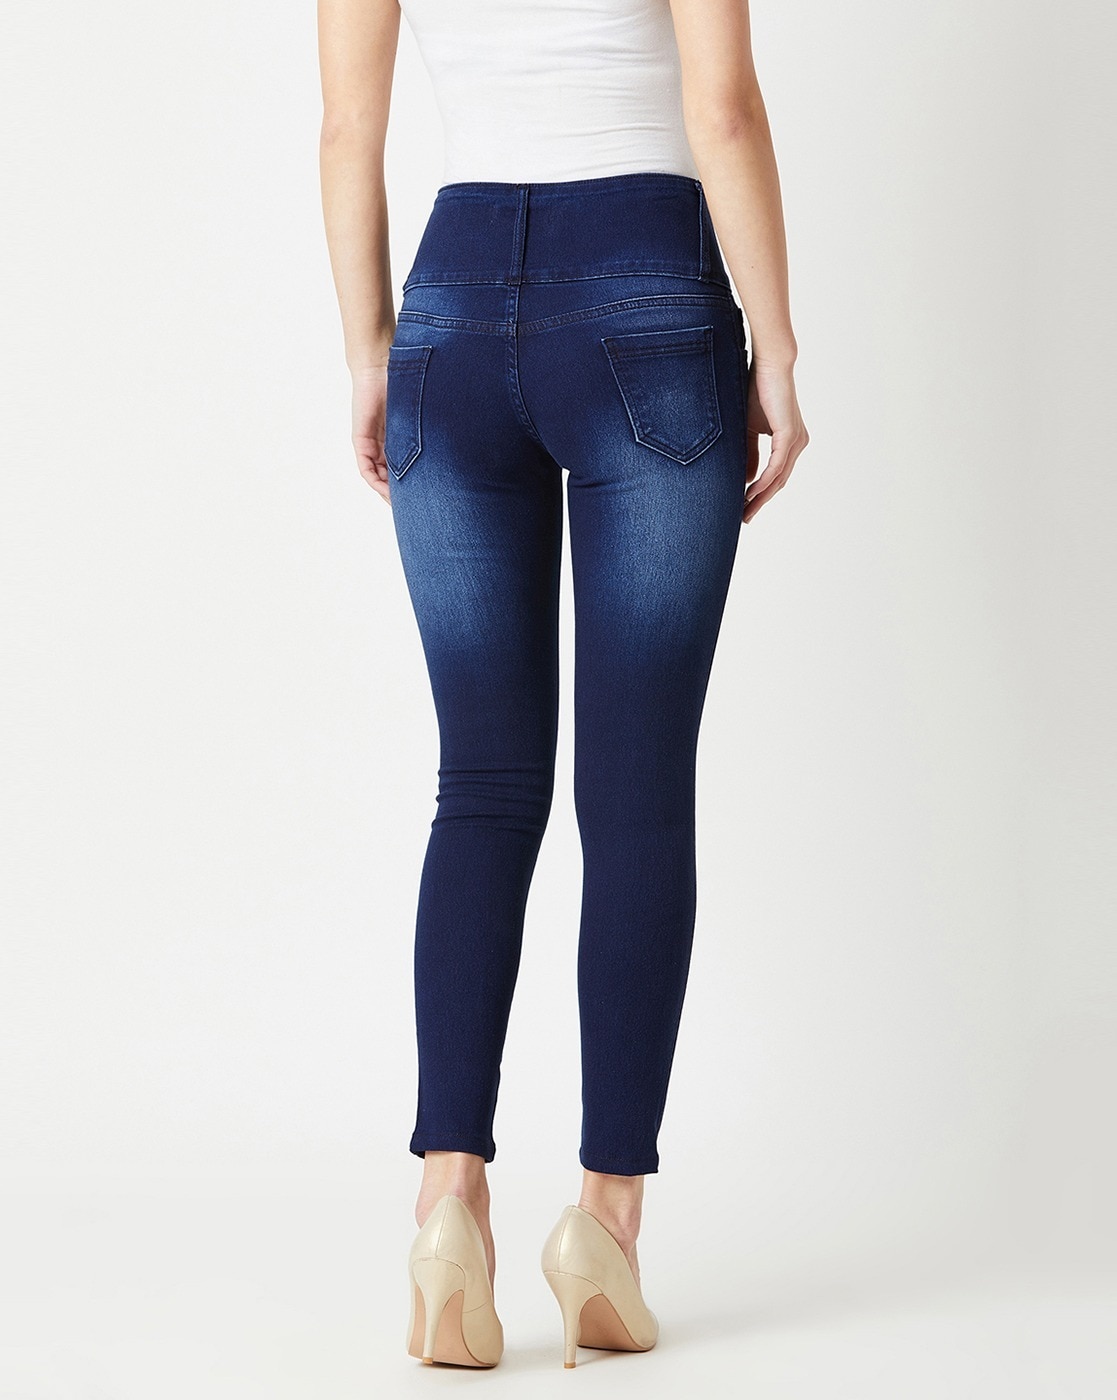 Amazon.in: Boom Jeans For Women